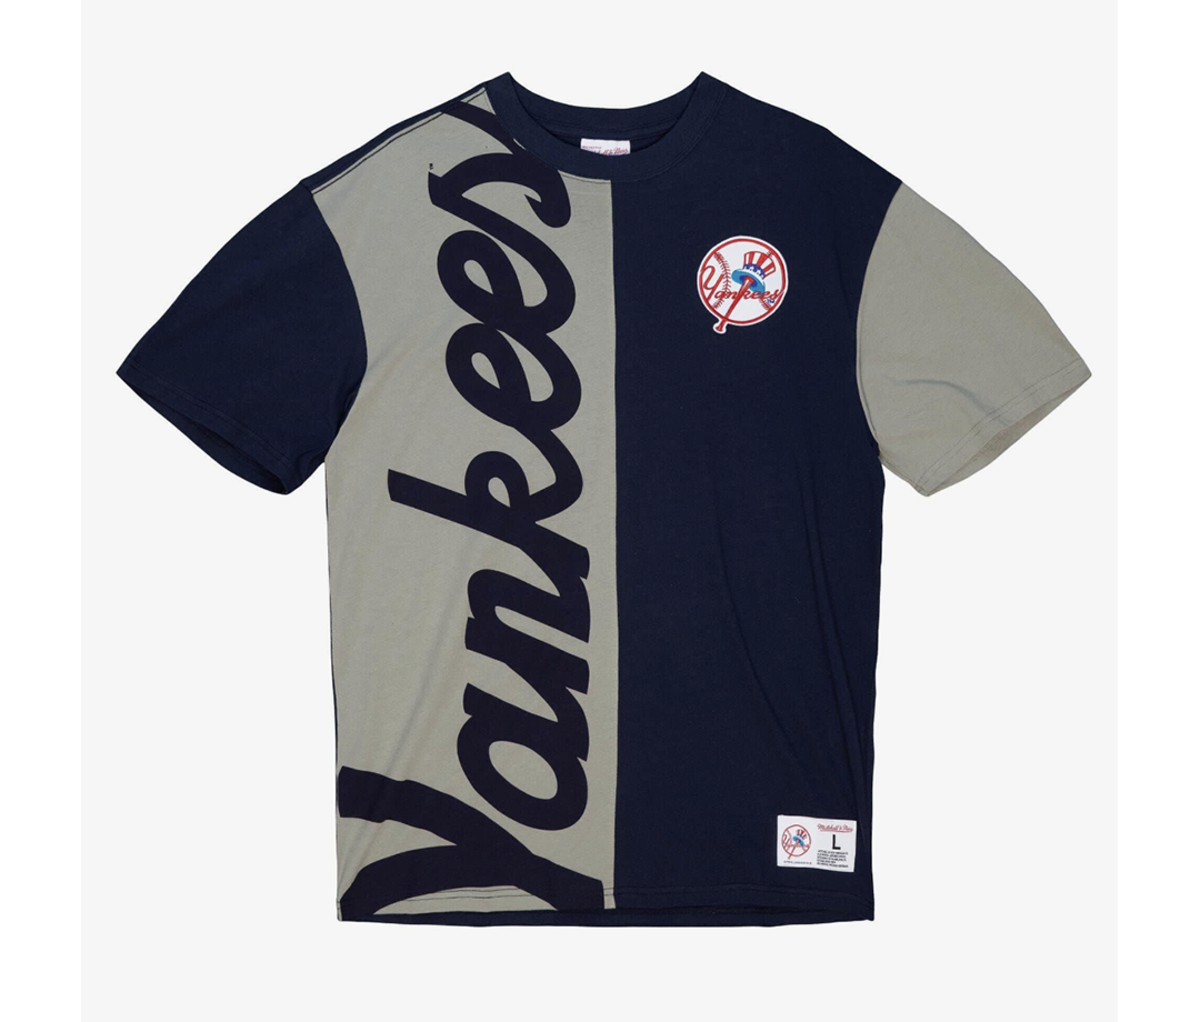 Get Dad Some Great Sports Attire With The Mitchell & Ness Father’s Day ...